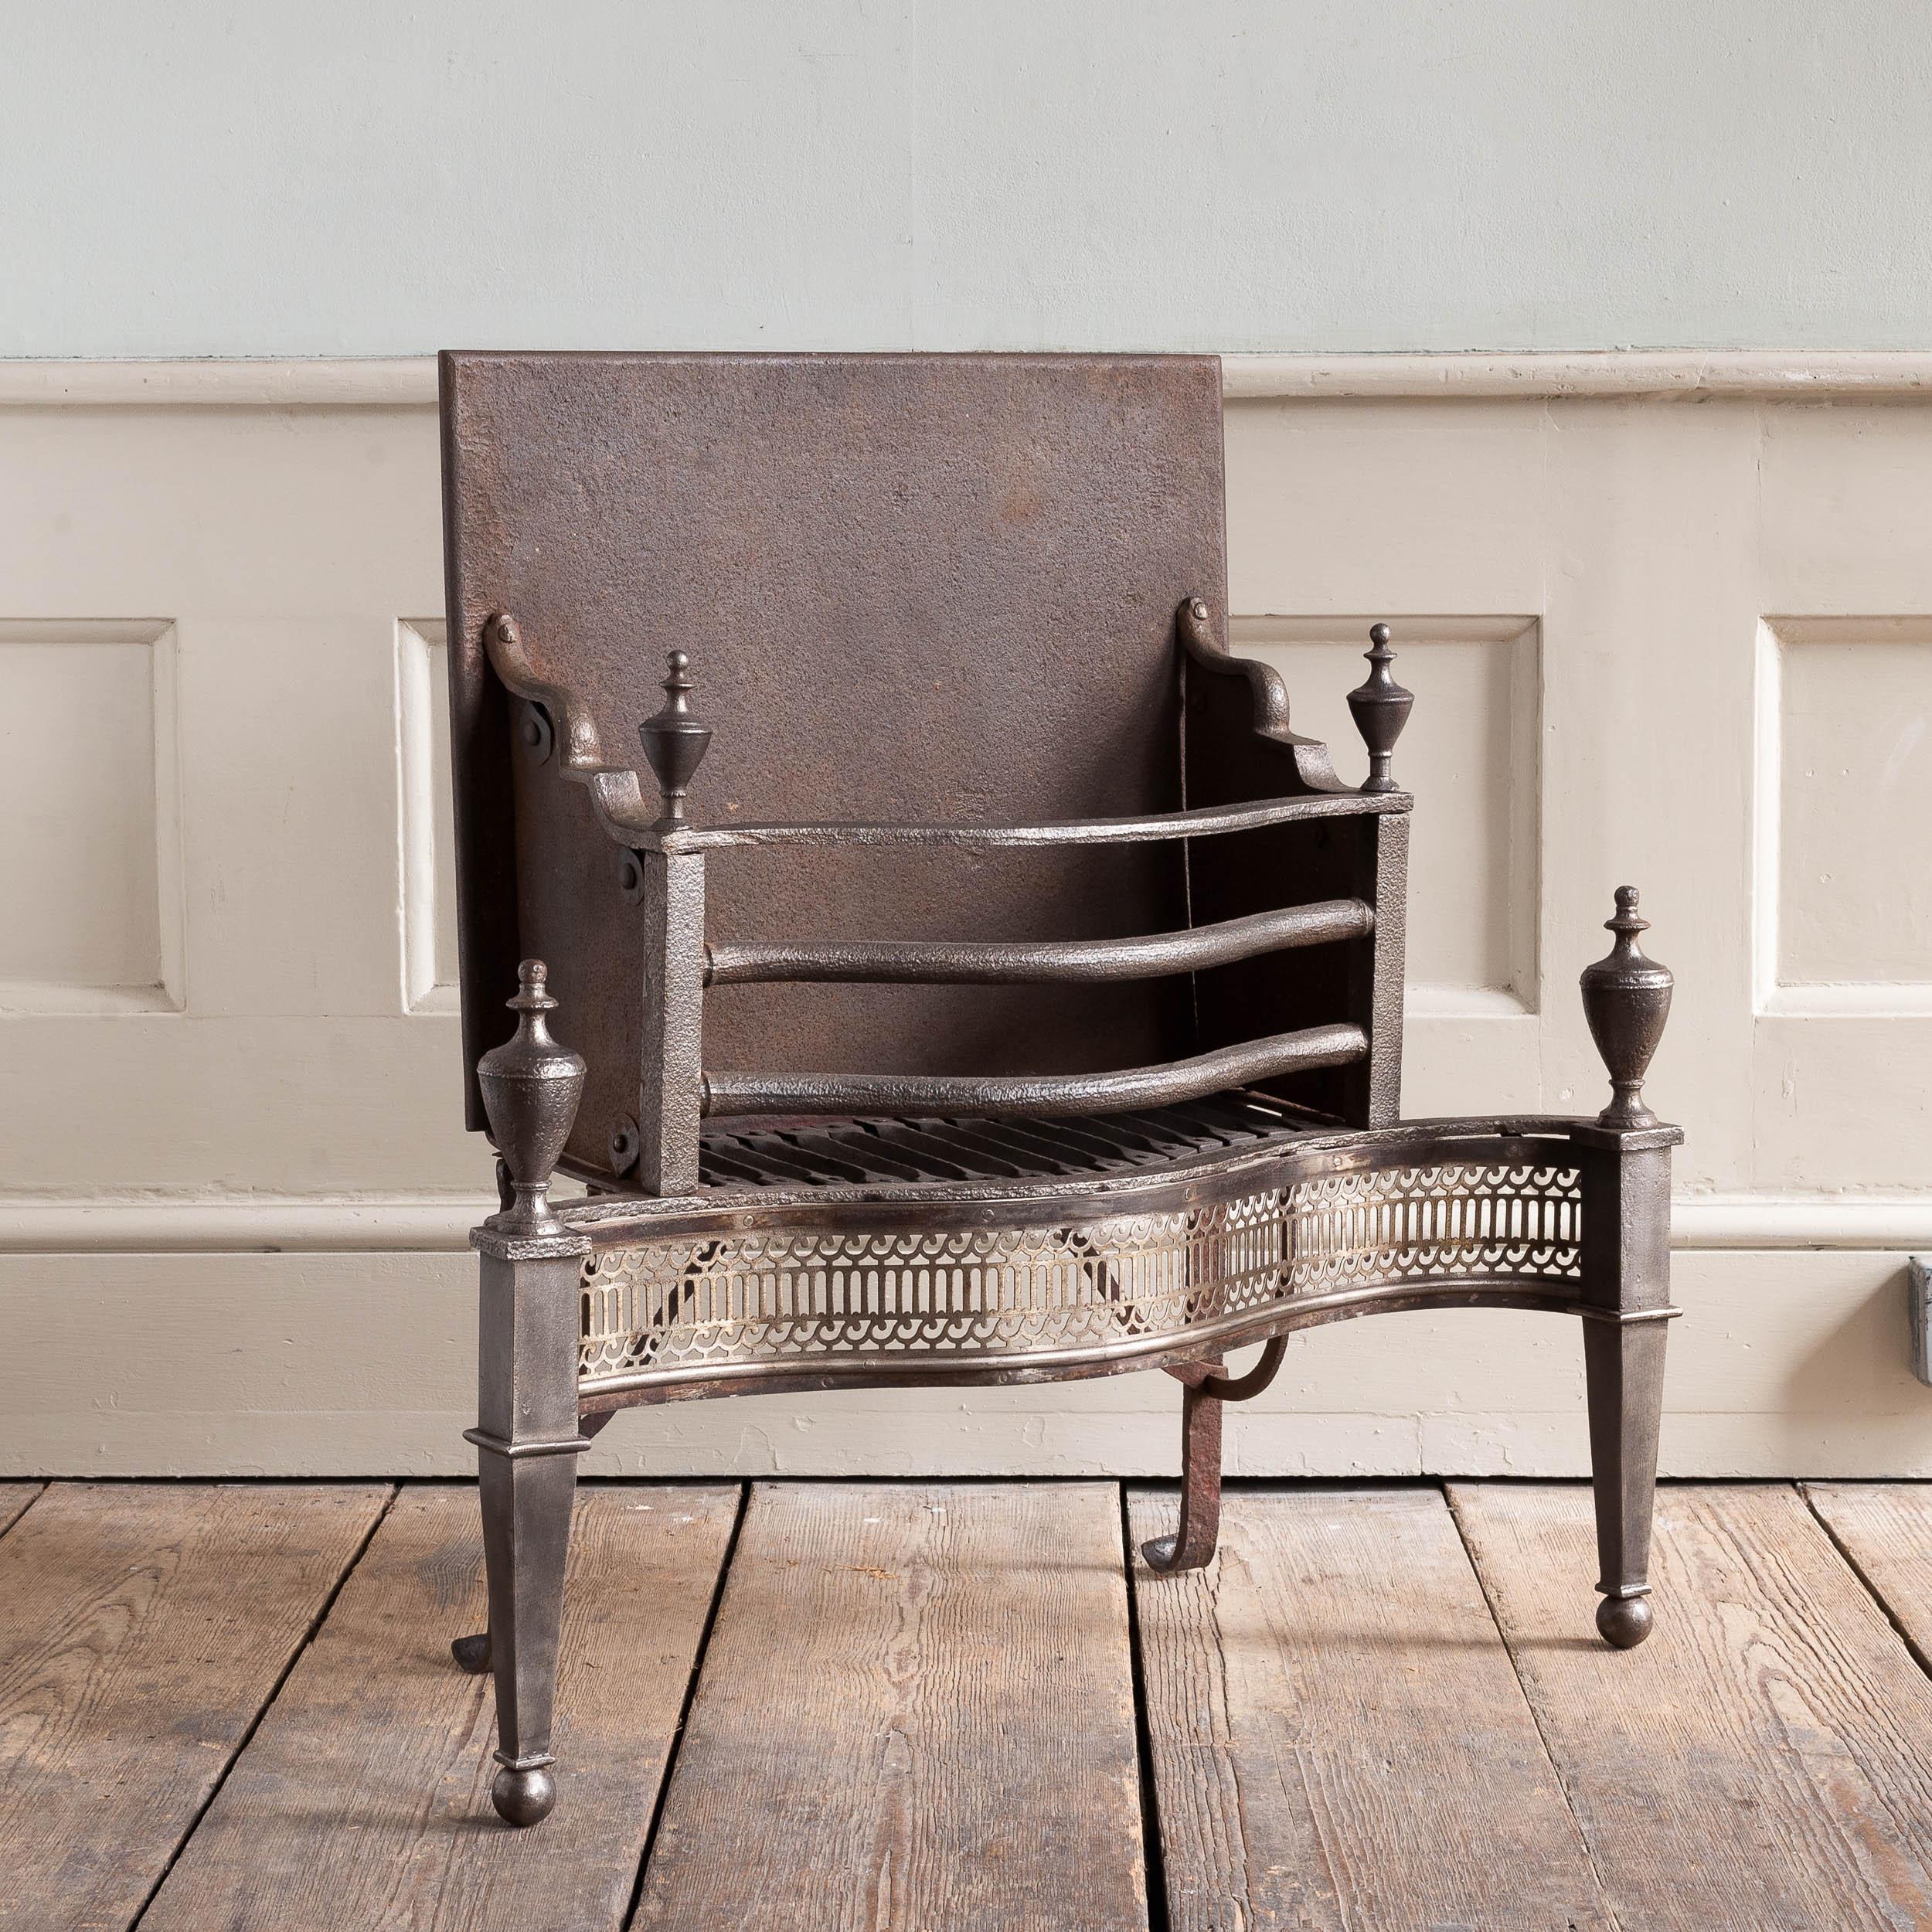 A George III fire grate, iron and steel, with urn finials and serpentine railed basket, the fretwork apron with bands of Vitruvian scrollwork, the tapered standards with ball feet, circa 1780. 


Dimensions:	79cm (31